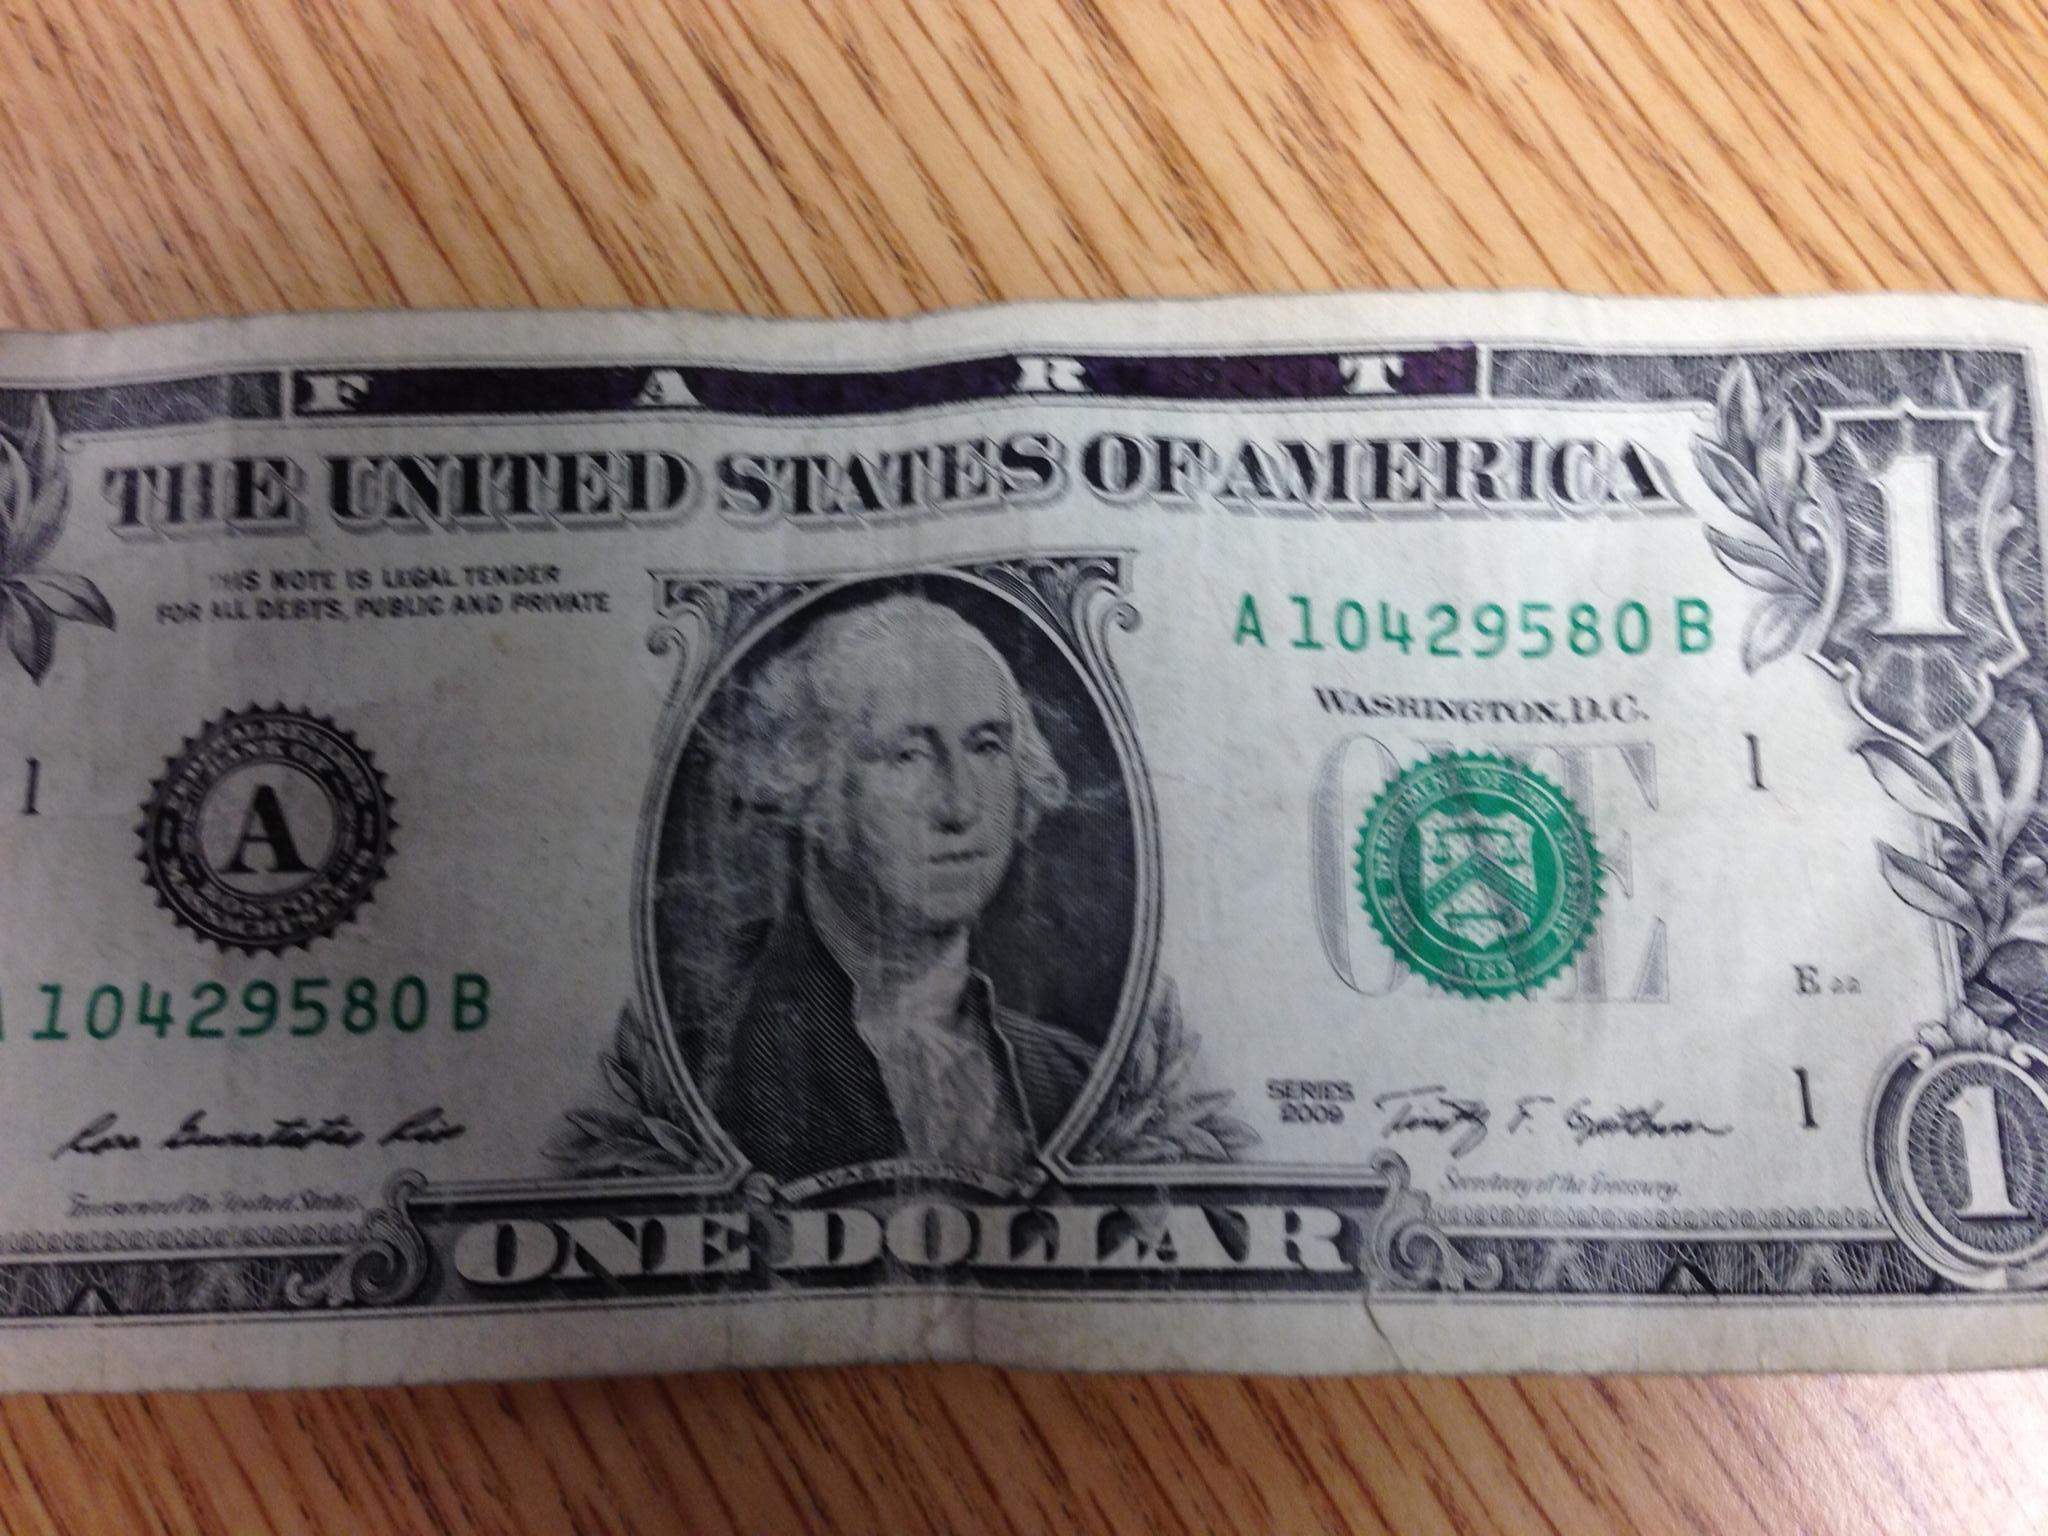 I was about to insert a dollar bill into the vending machine, when I ...